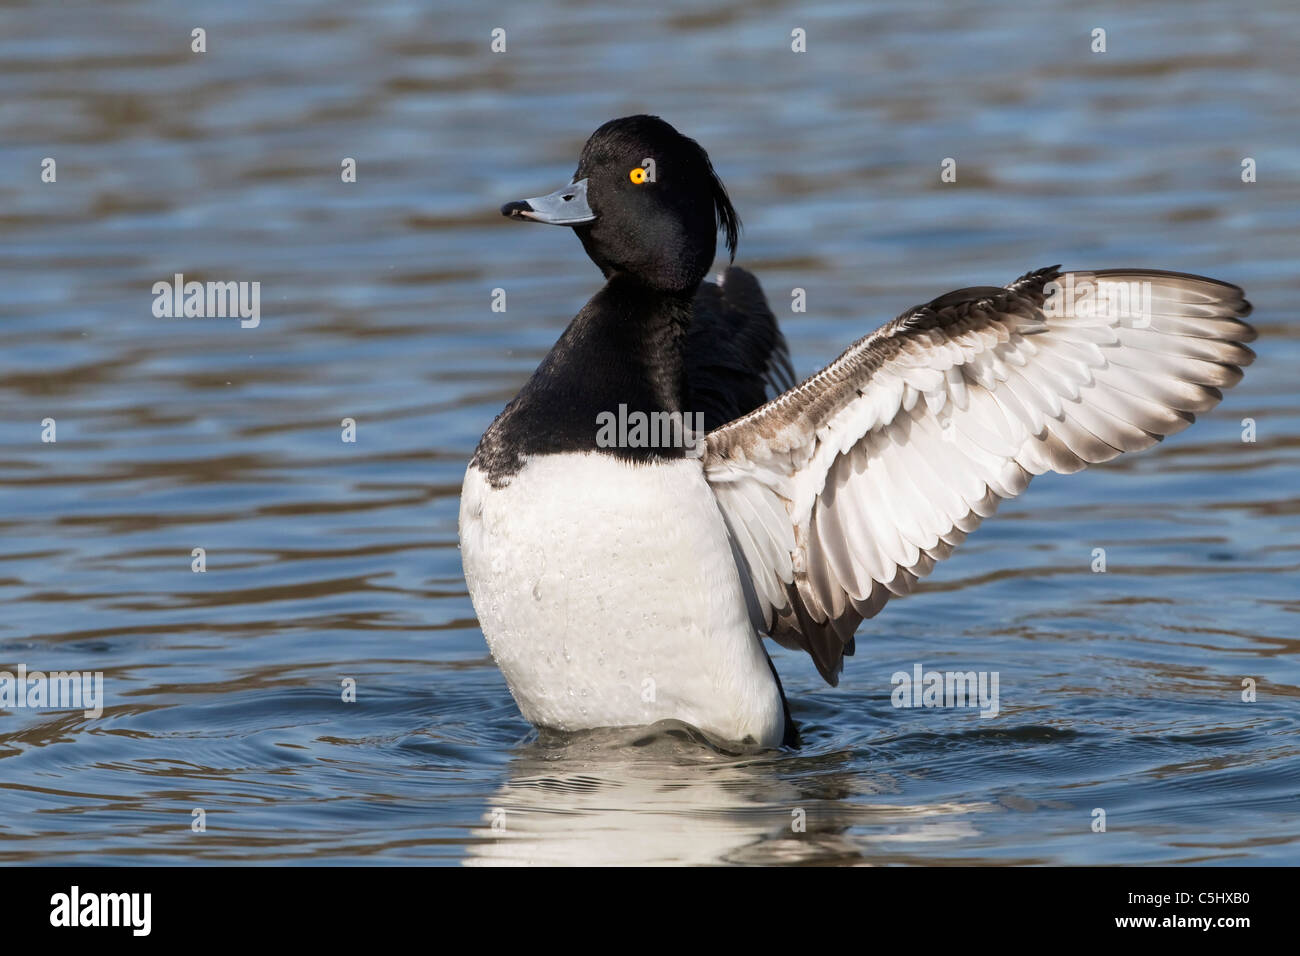 A male Tufted Duck flapping its wings after preening Stock Photo